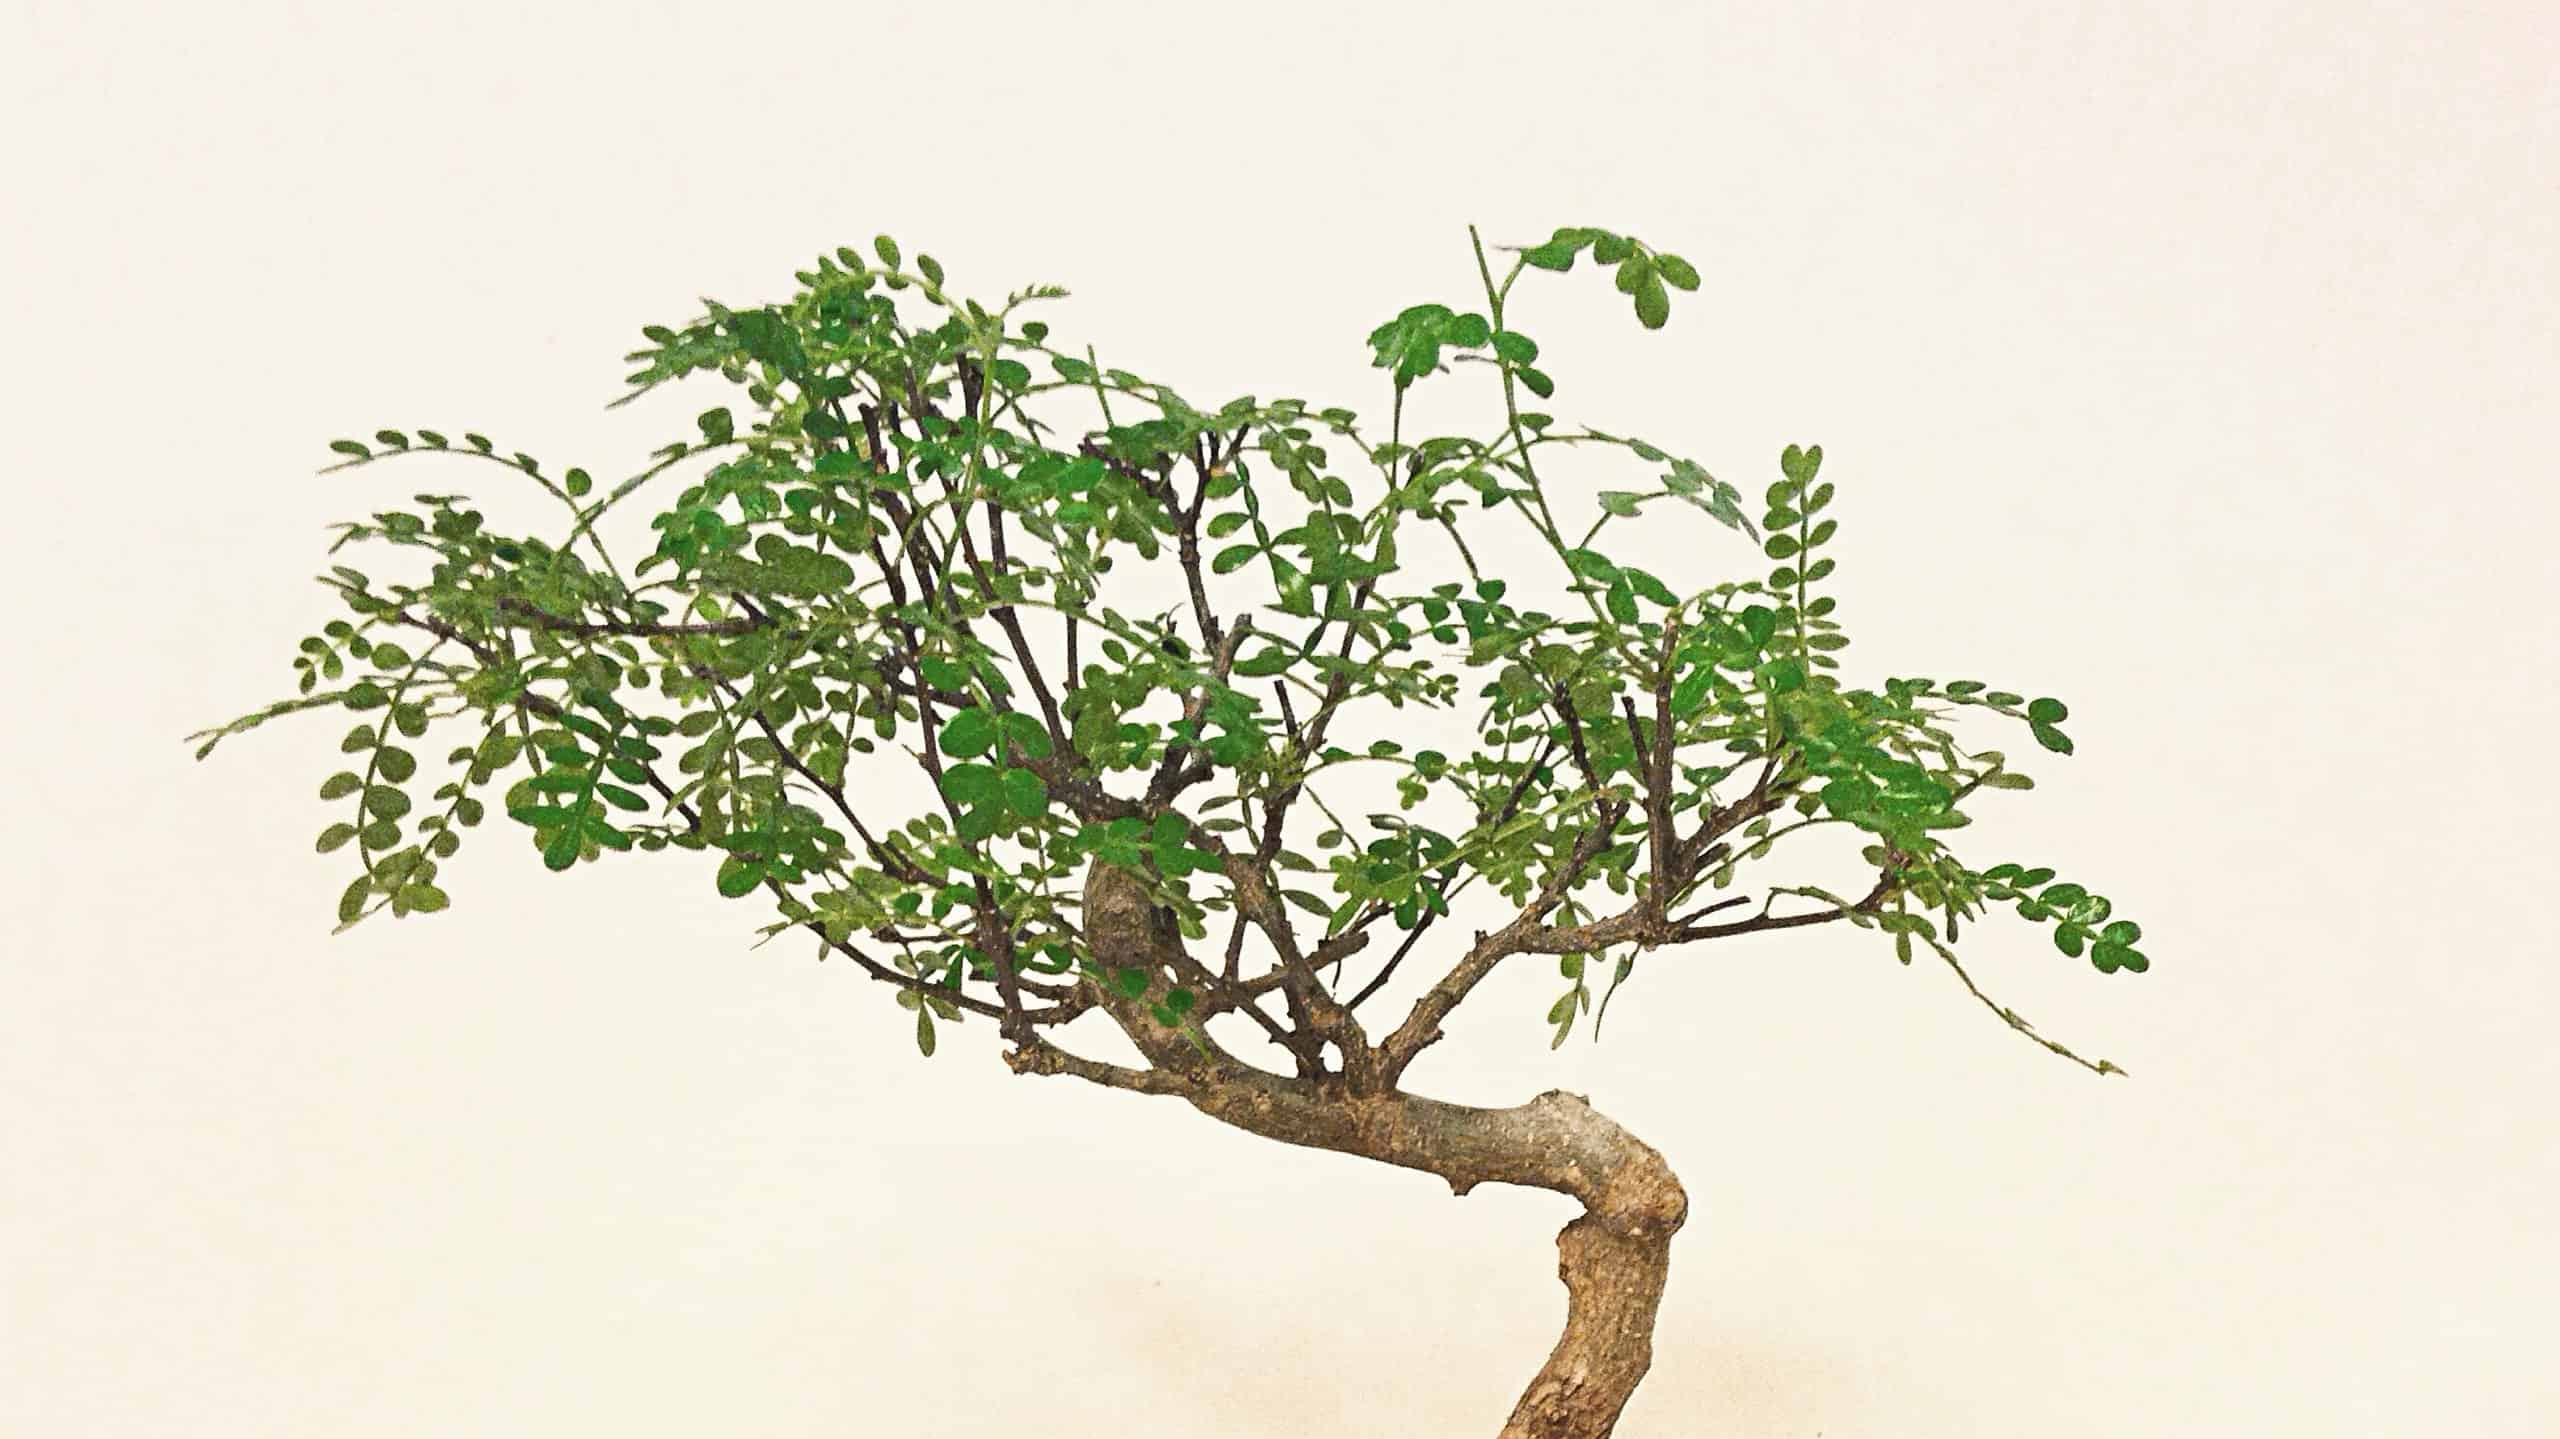 Chinese pepper bonsai in white pot on white background